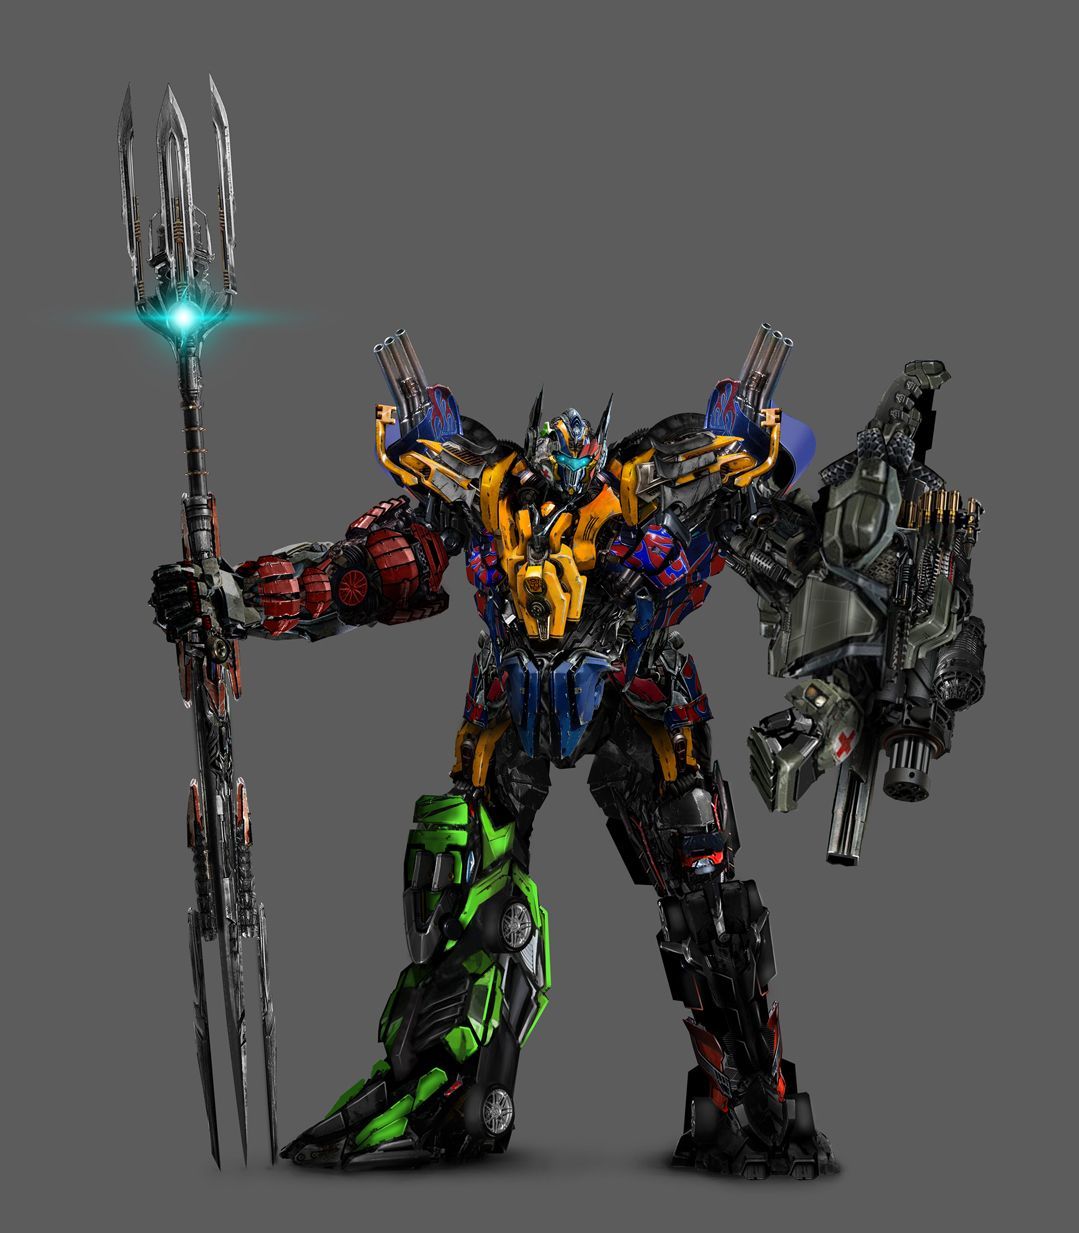 Click This Image To Show The Full Size Version. Transformers Art, Optimus Prime Wallpaper Transformers, Transformers Autobots